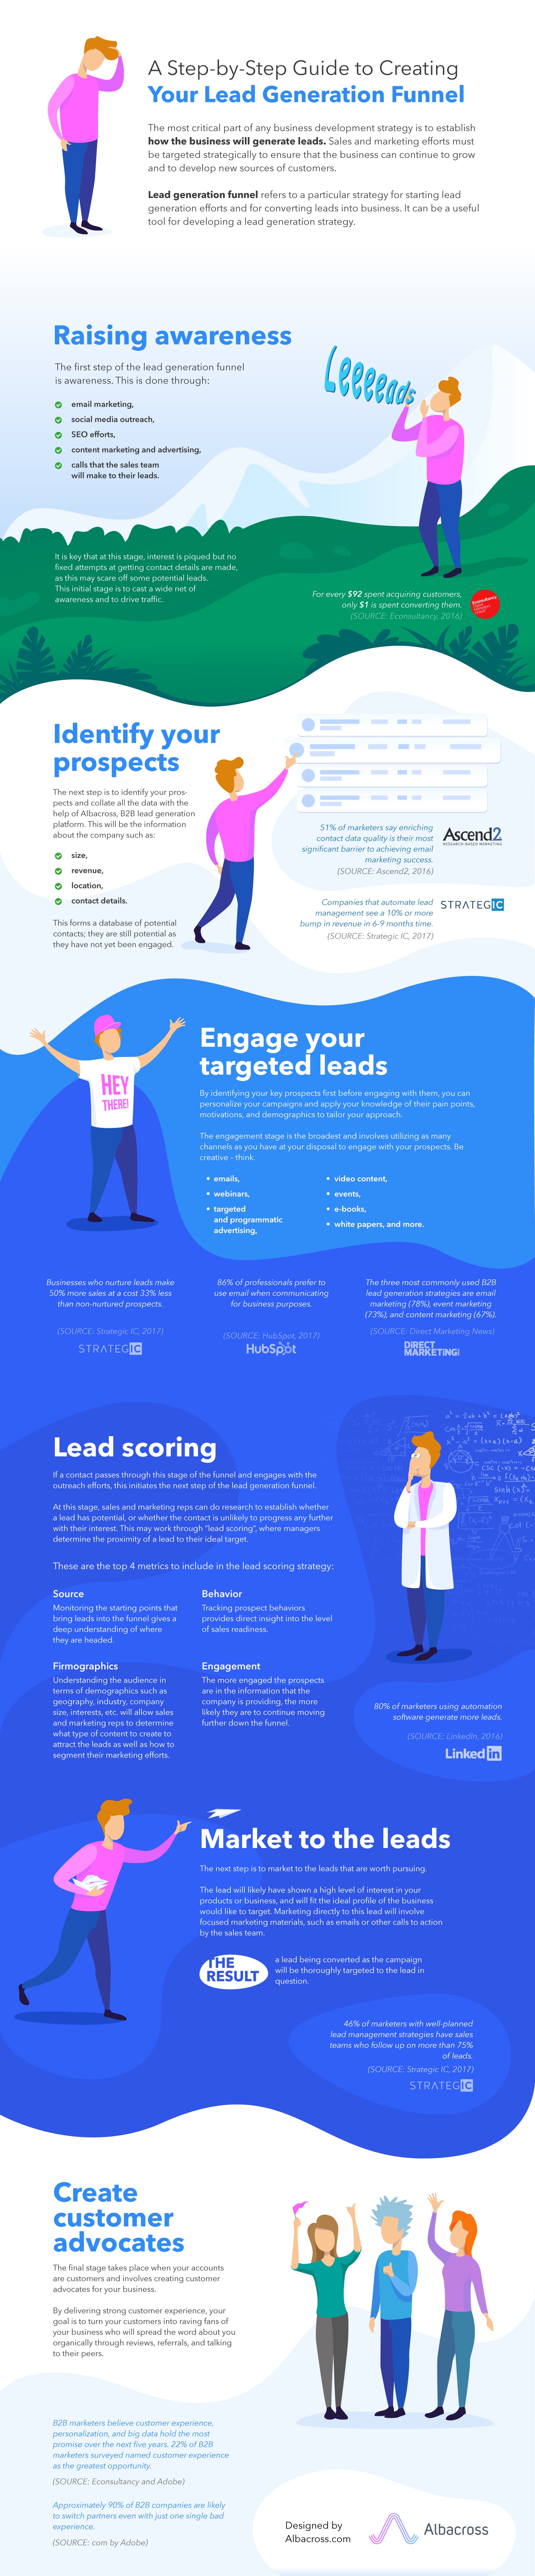 Guide to Creating Your Lead Generation Funnel - Infographic